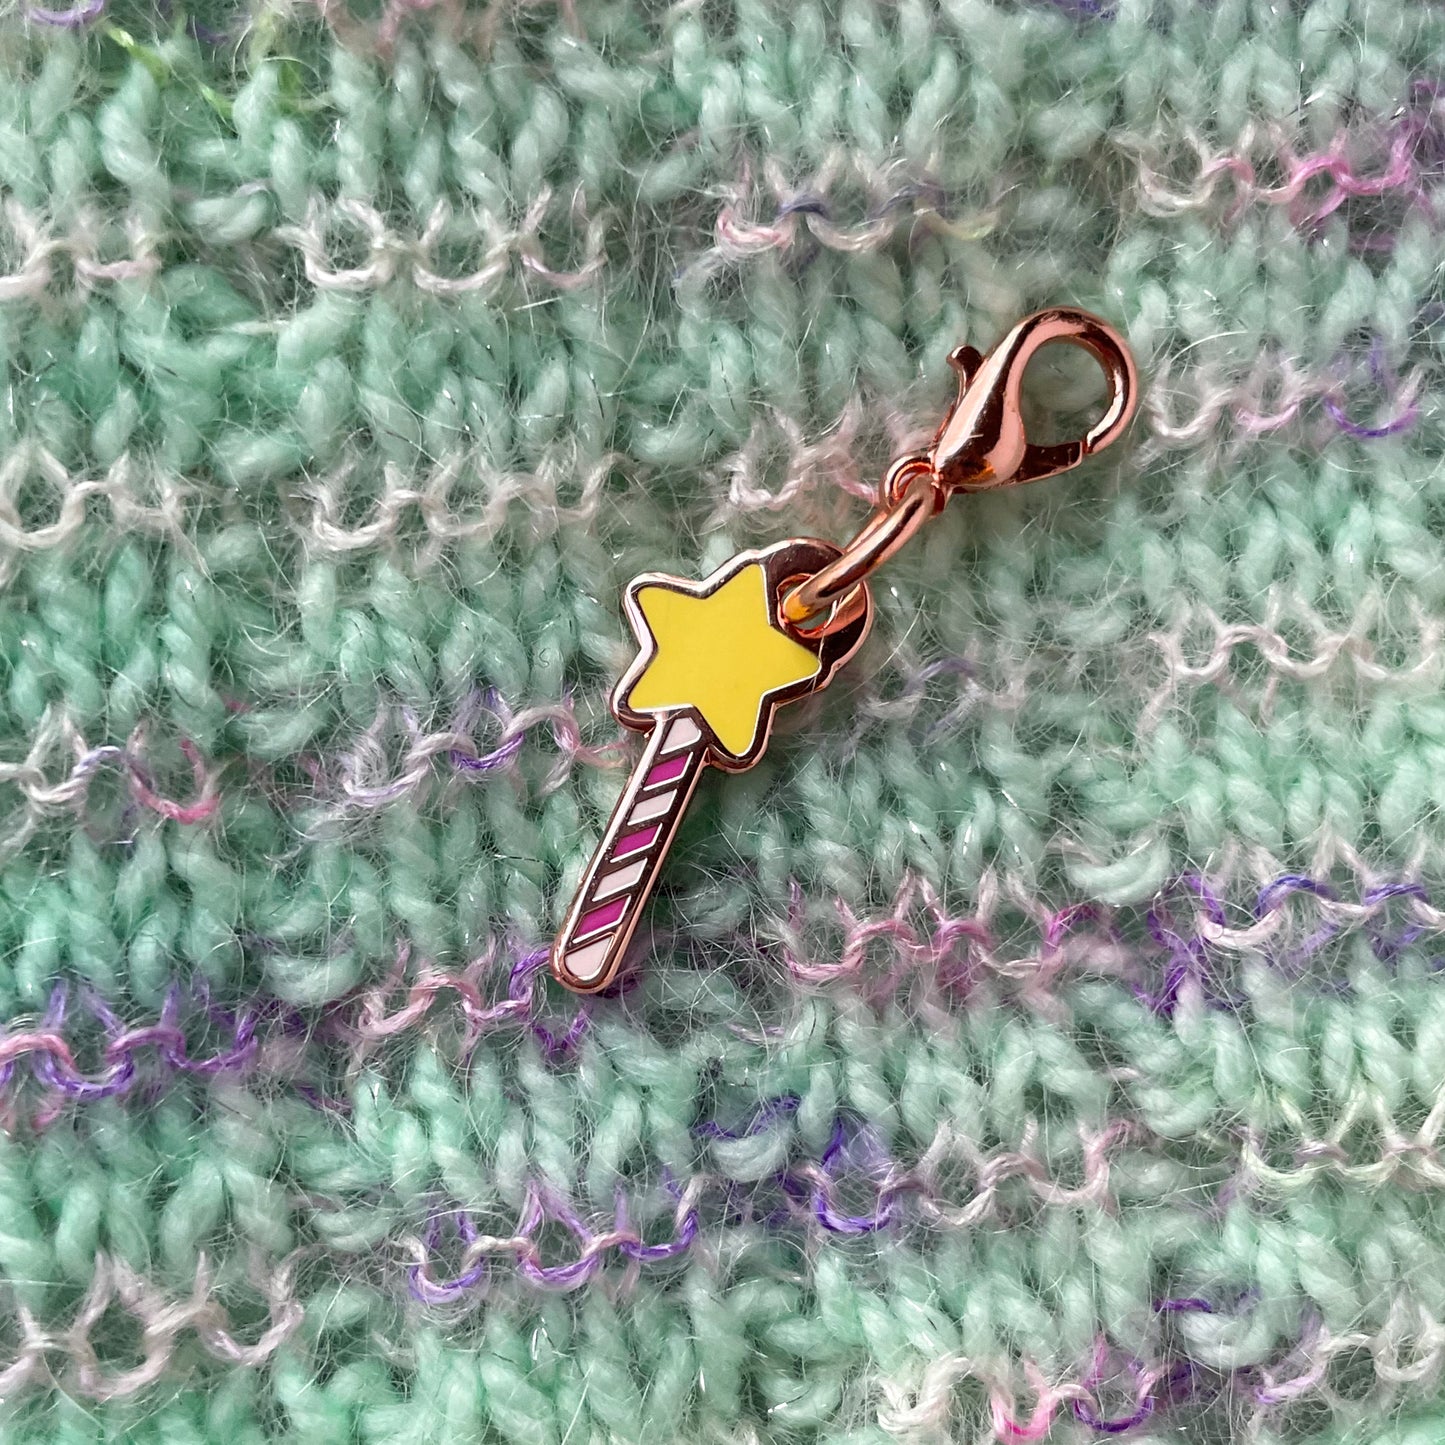 A star wand charm on a background of hand knit fabric. The fabric is mint green with fuzzy pink stripes.